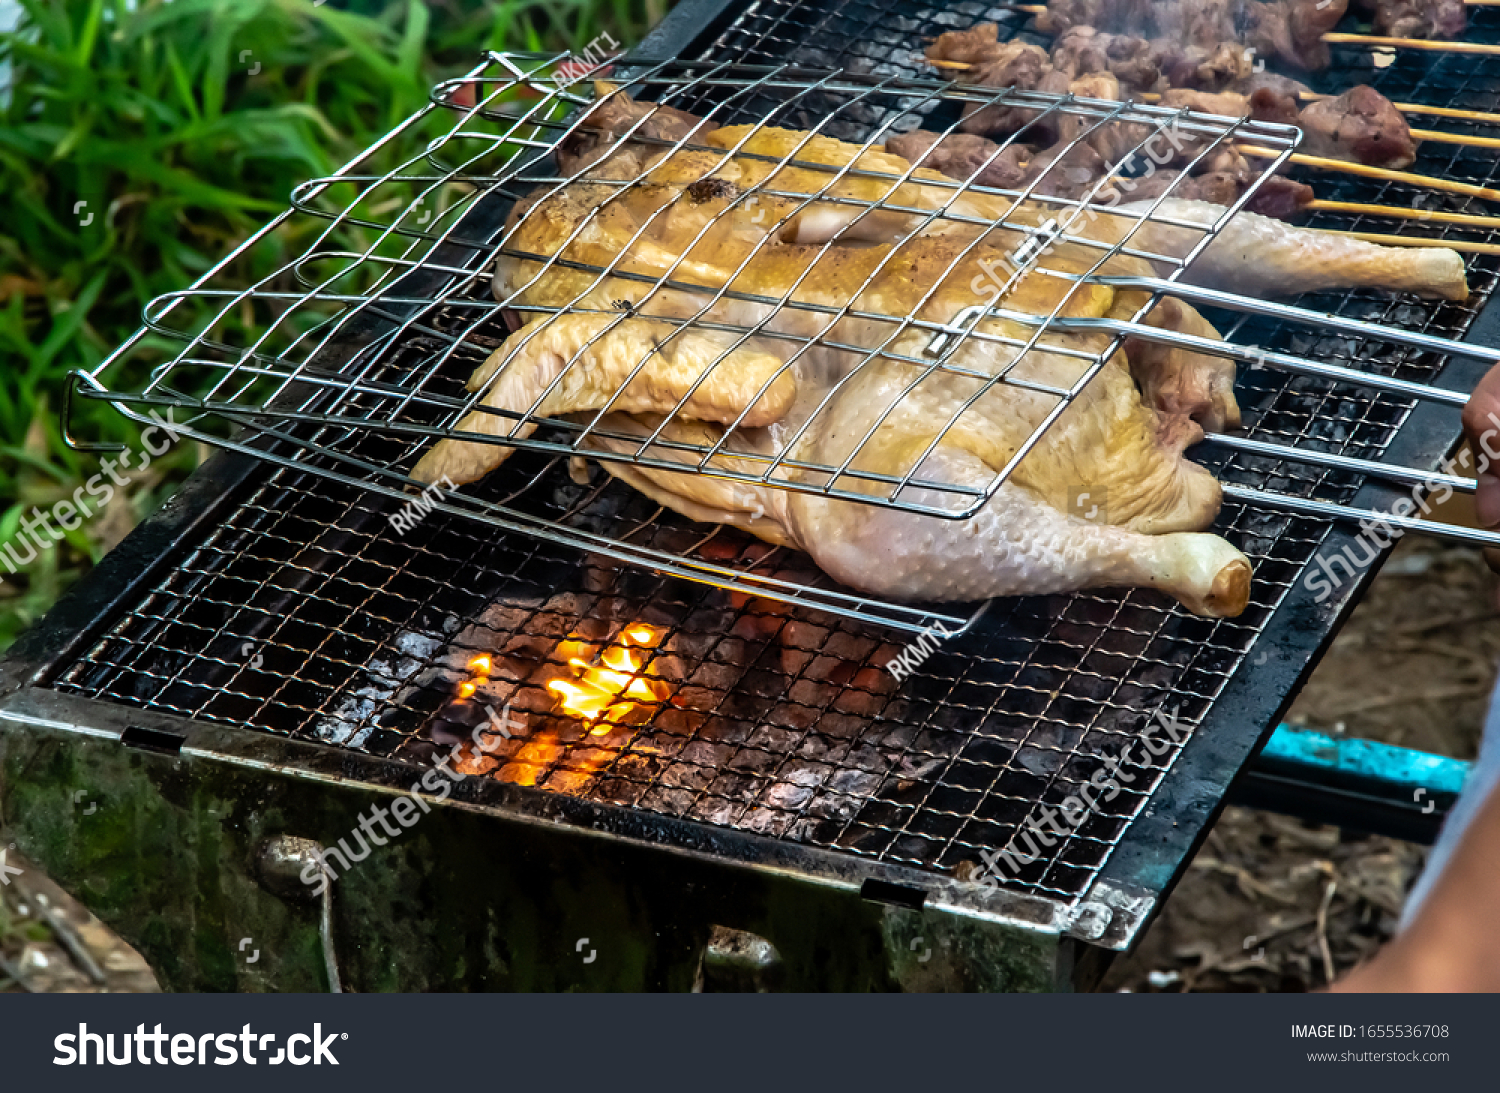 Barbecued fresh whole chicken outdoors in the forest #1655536708